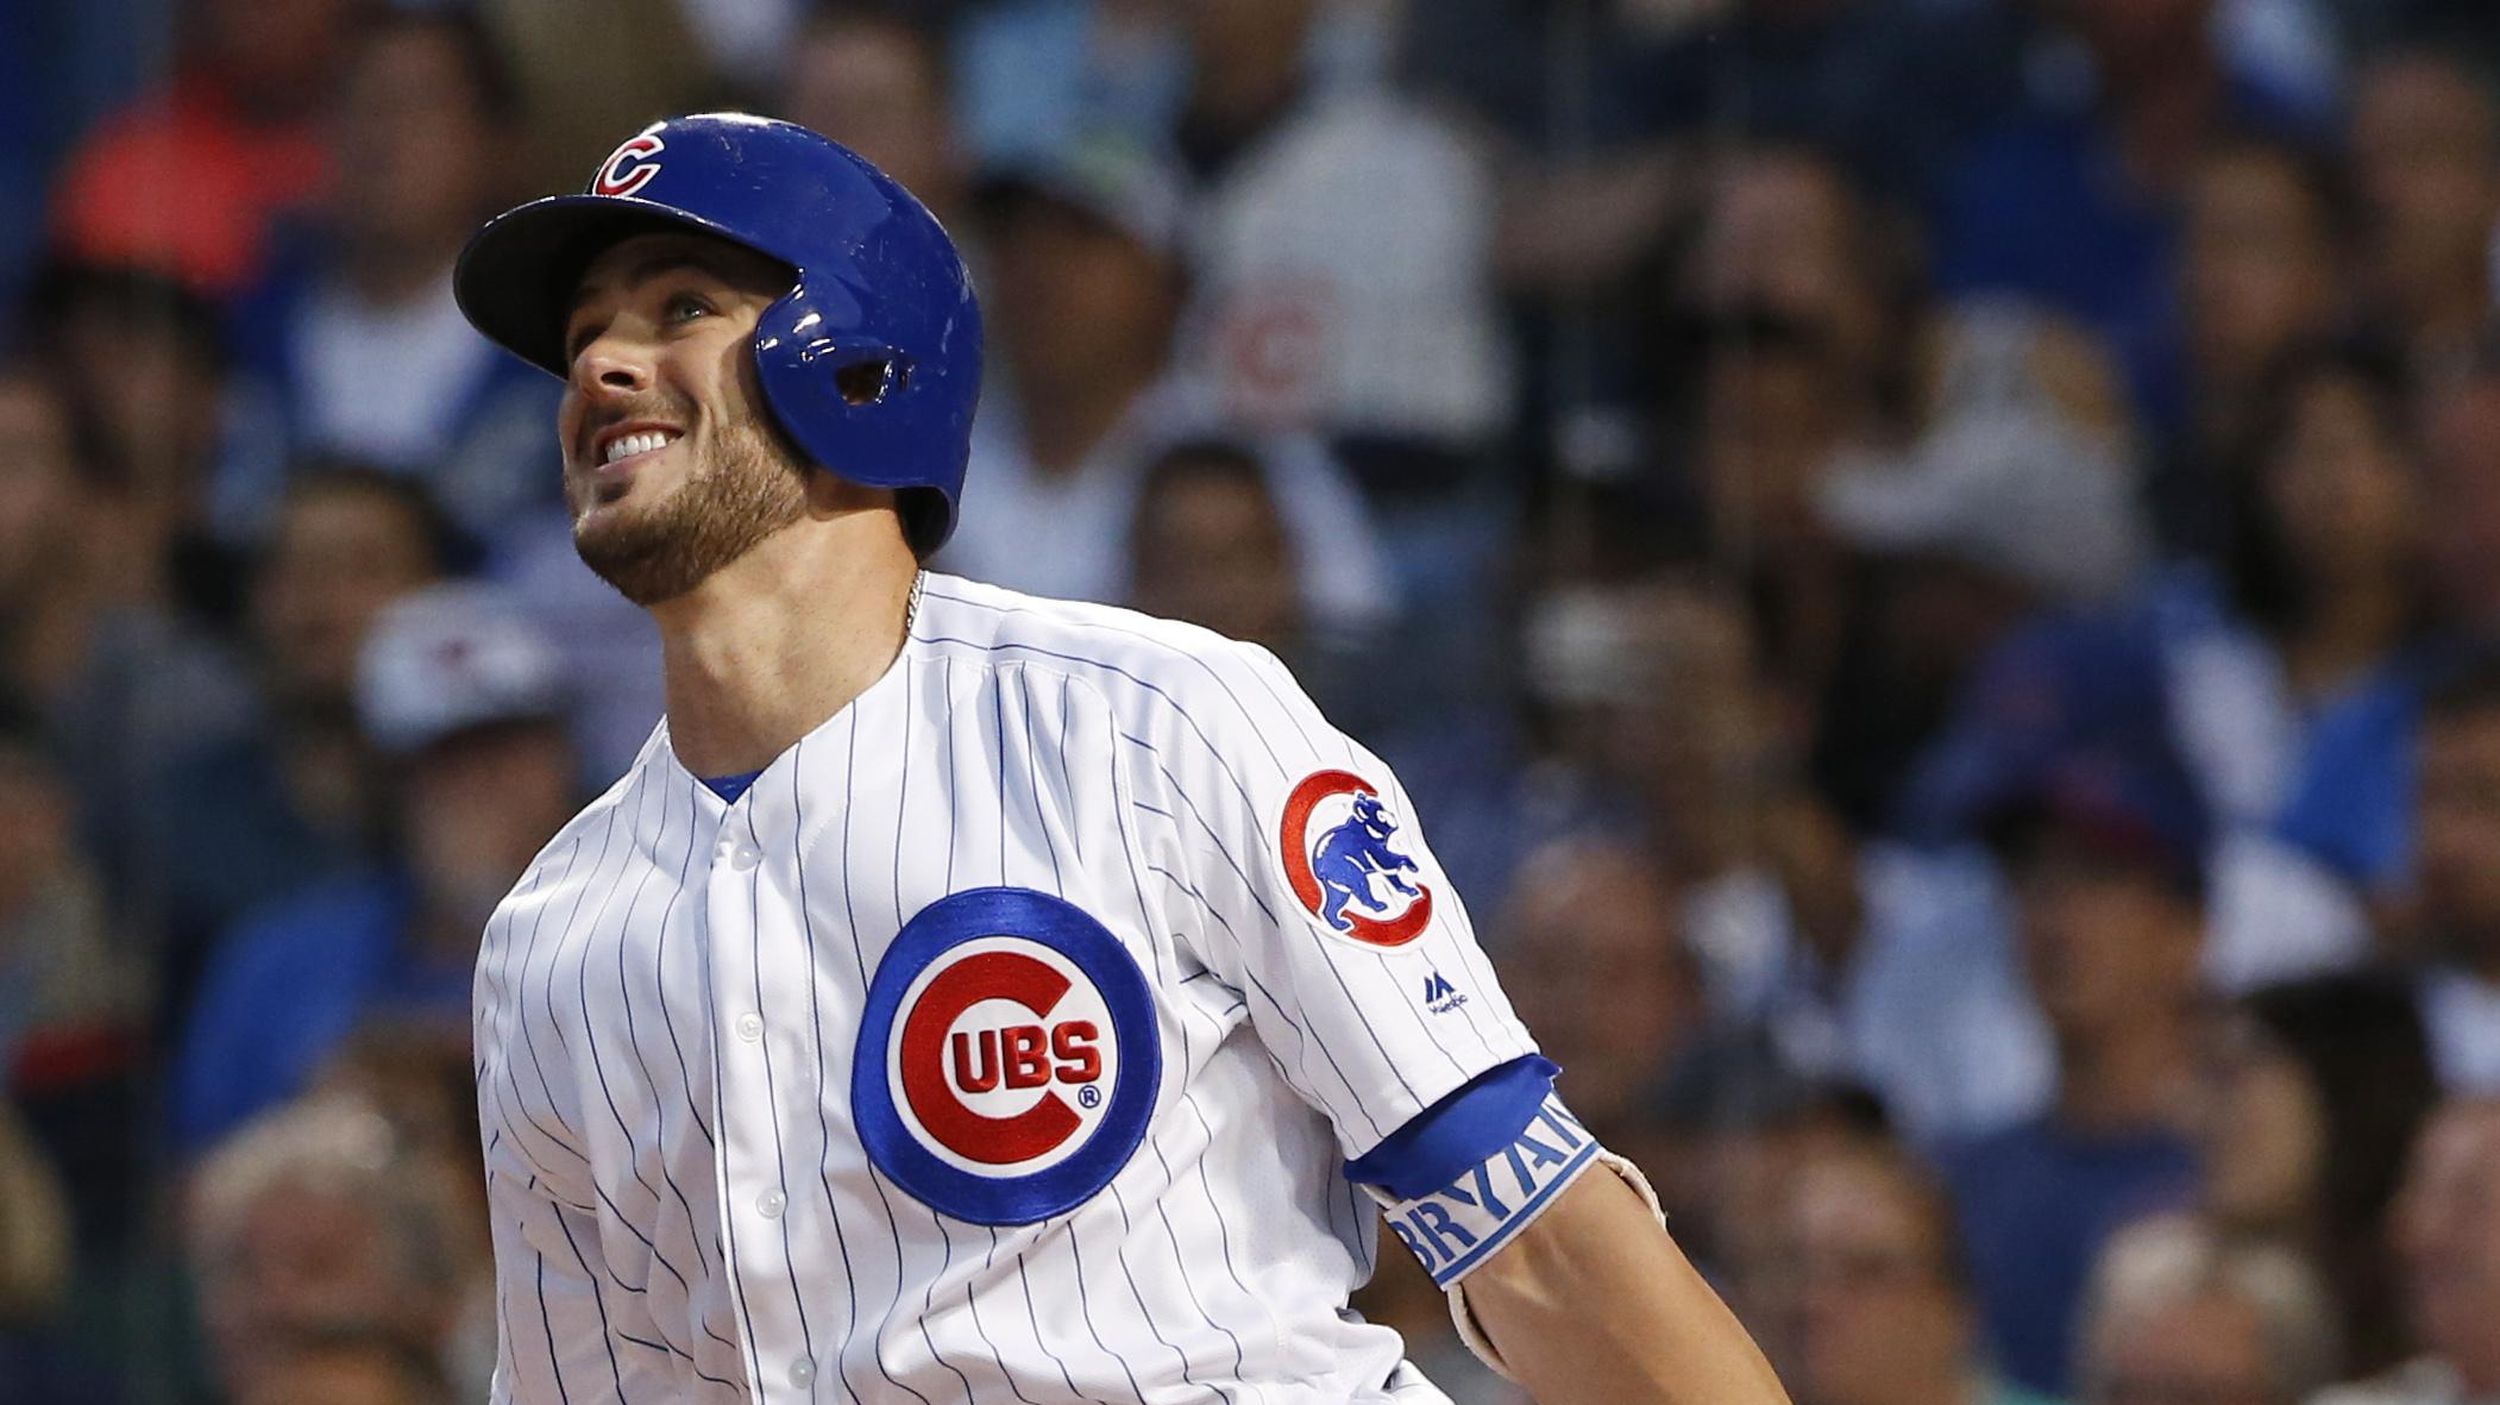 A Scientific Analysis of Why Rookie of The Year Kris Bryant Is So